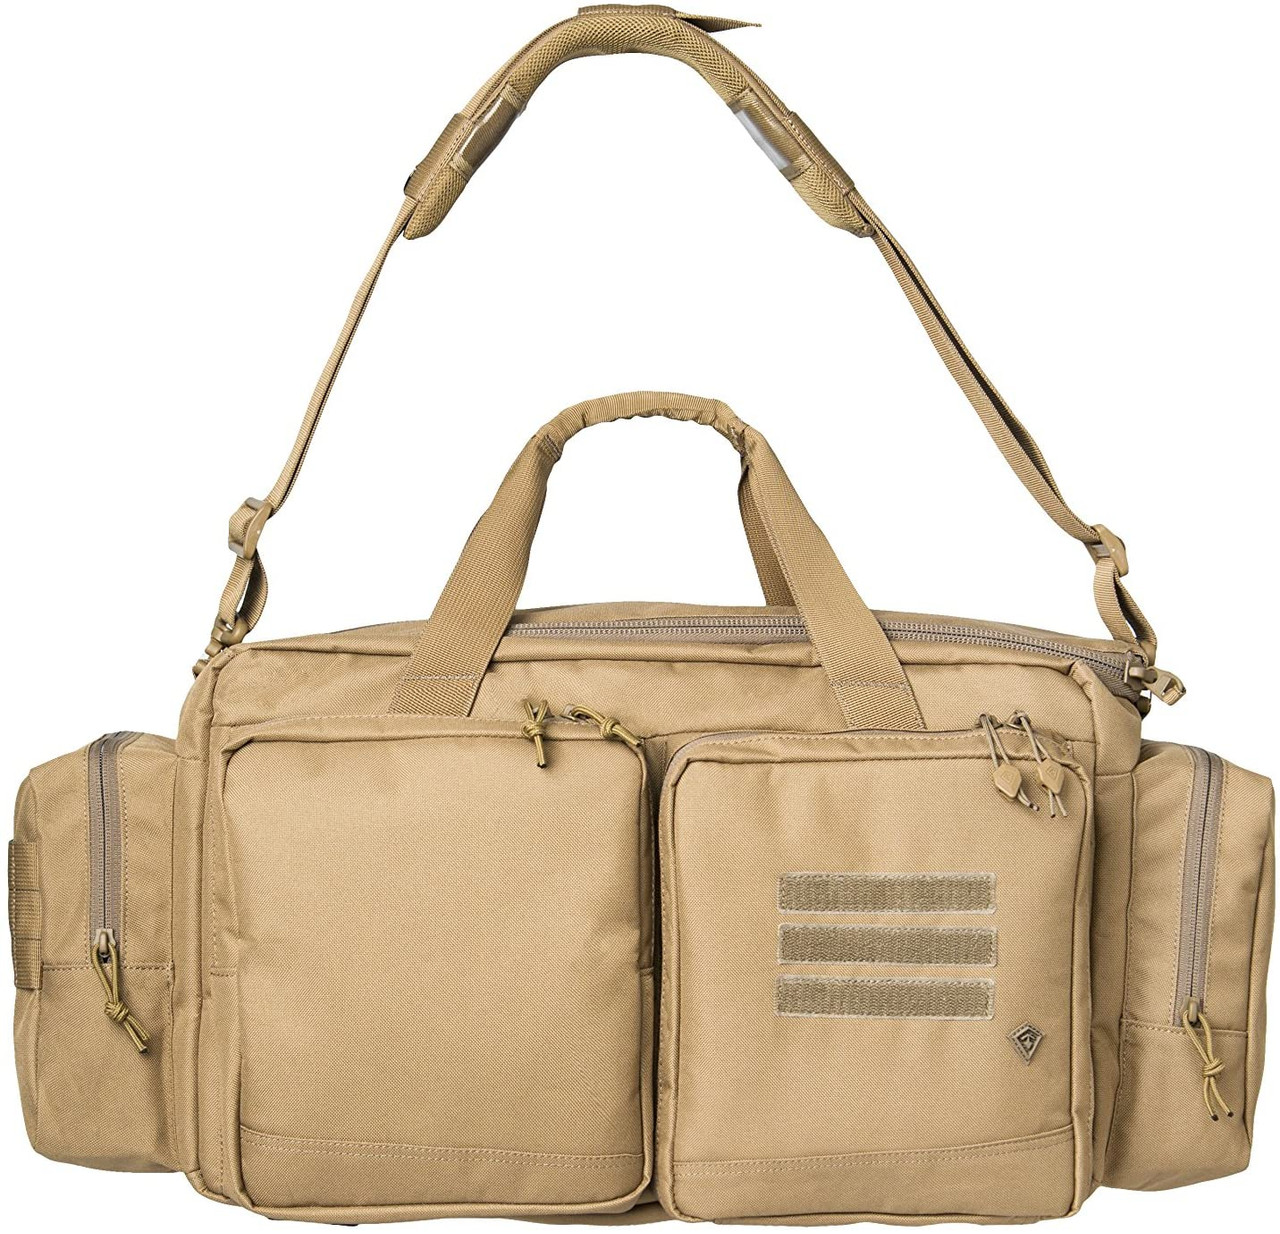 Coyote Recoil Range Bag by First Tactical | Military Luggage